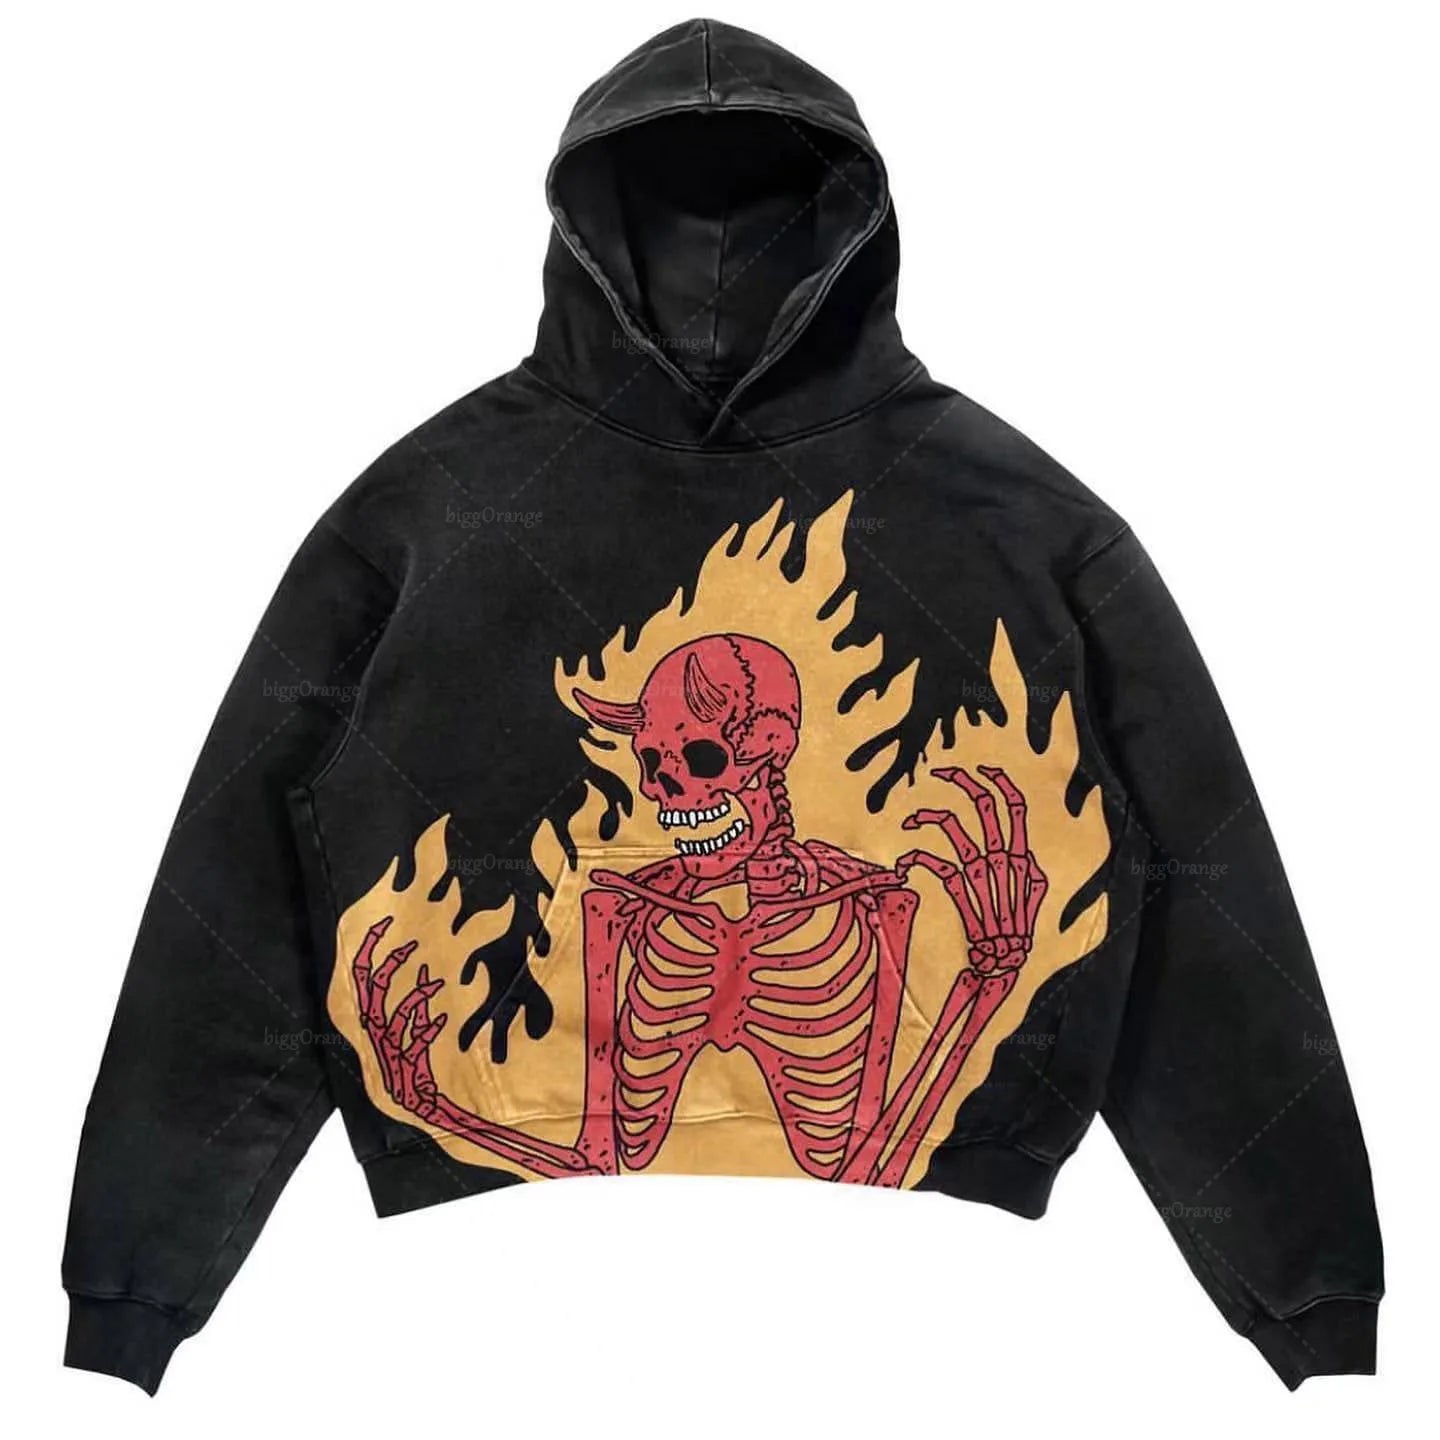 A black Maramalive™ Explosions Printed Skull Y2K Retro Hooded Sweater Coat Street Style Gothic Casual Fashion Hooded Sweater Men's Female featuring a retro design of a red skeleton with horns in flames on the front.